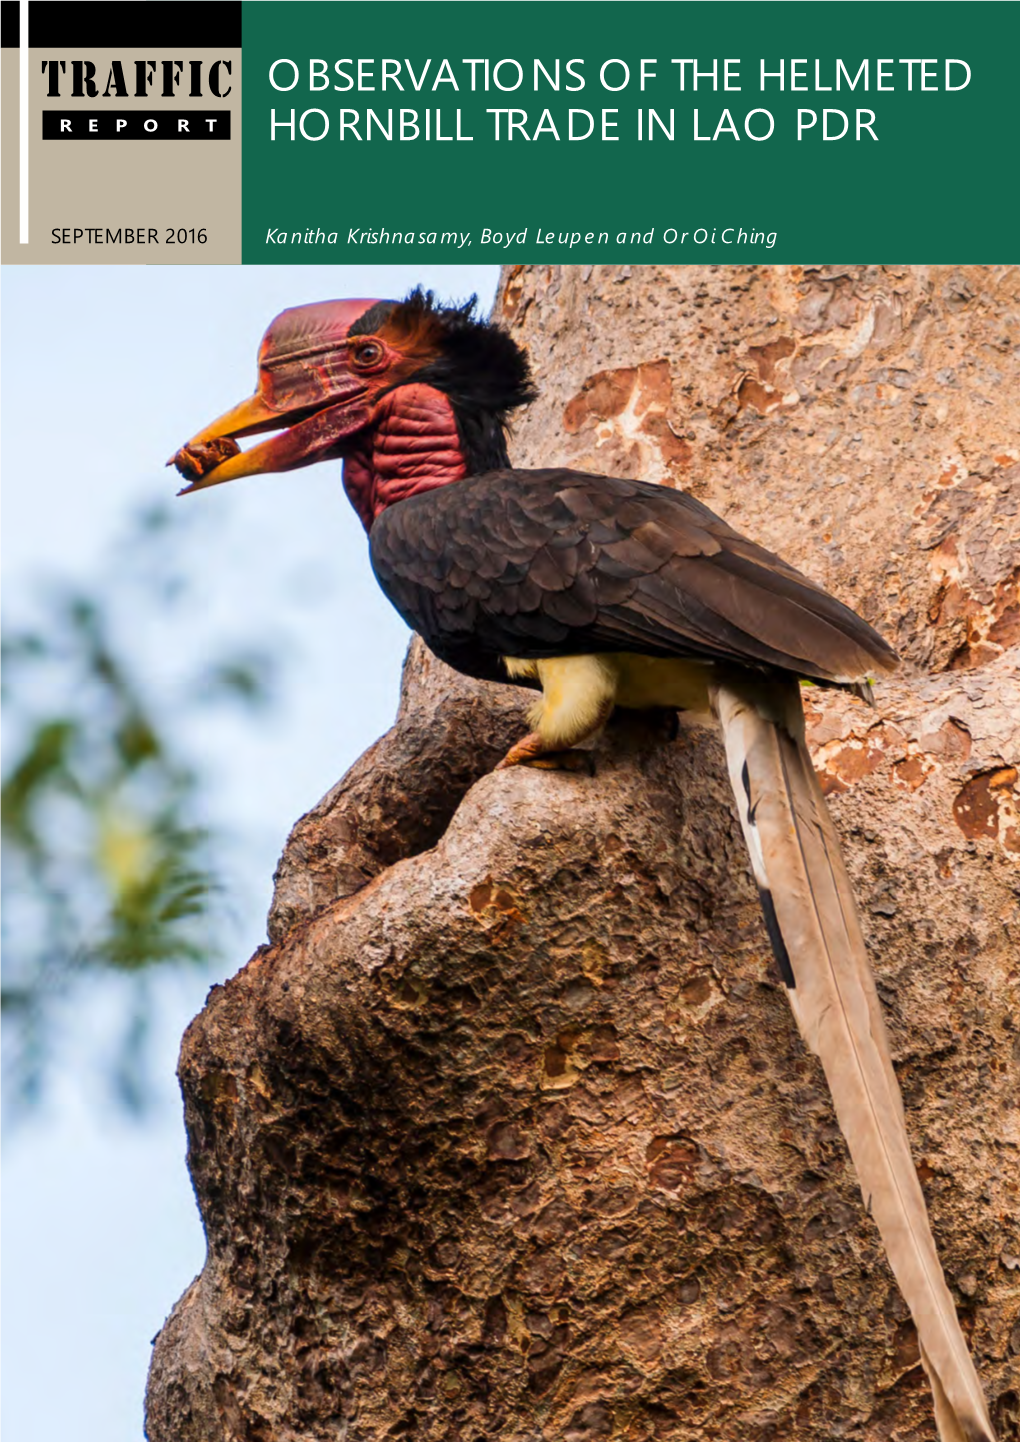 Observations of the Helmeted Hornbill Trade in Lao PDR 1 TRAFFIC REPORT